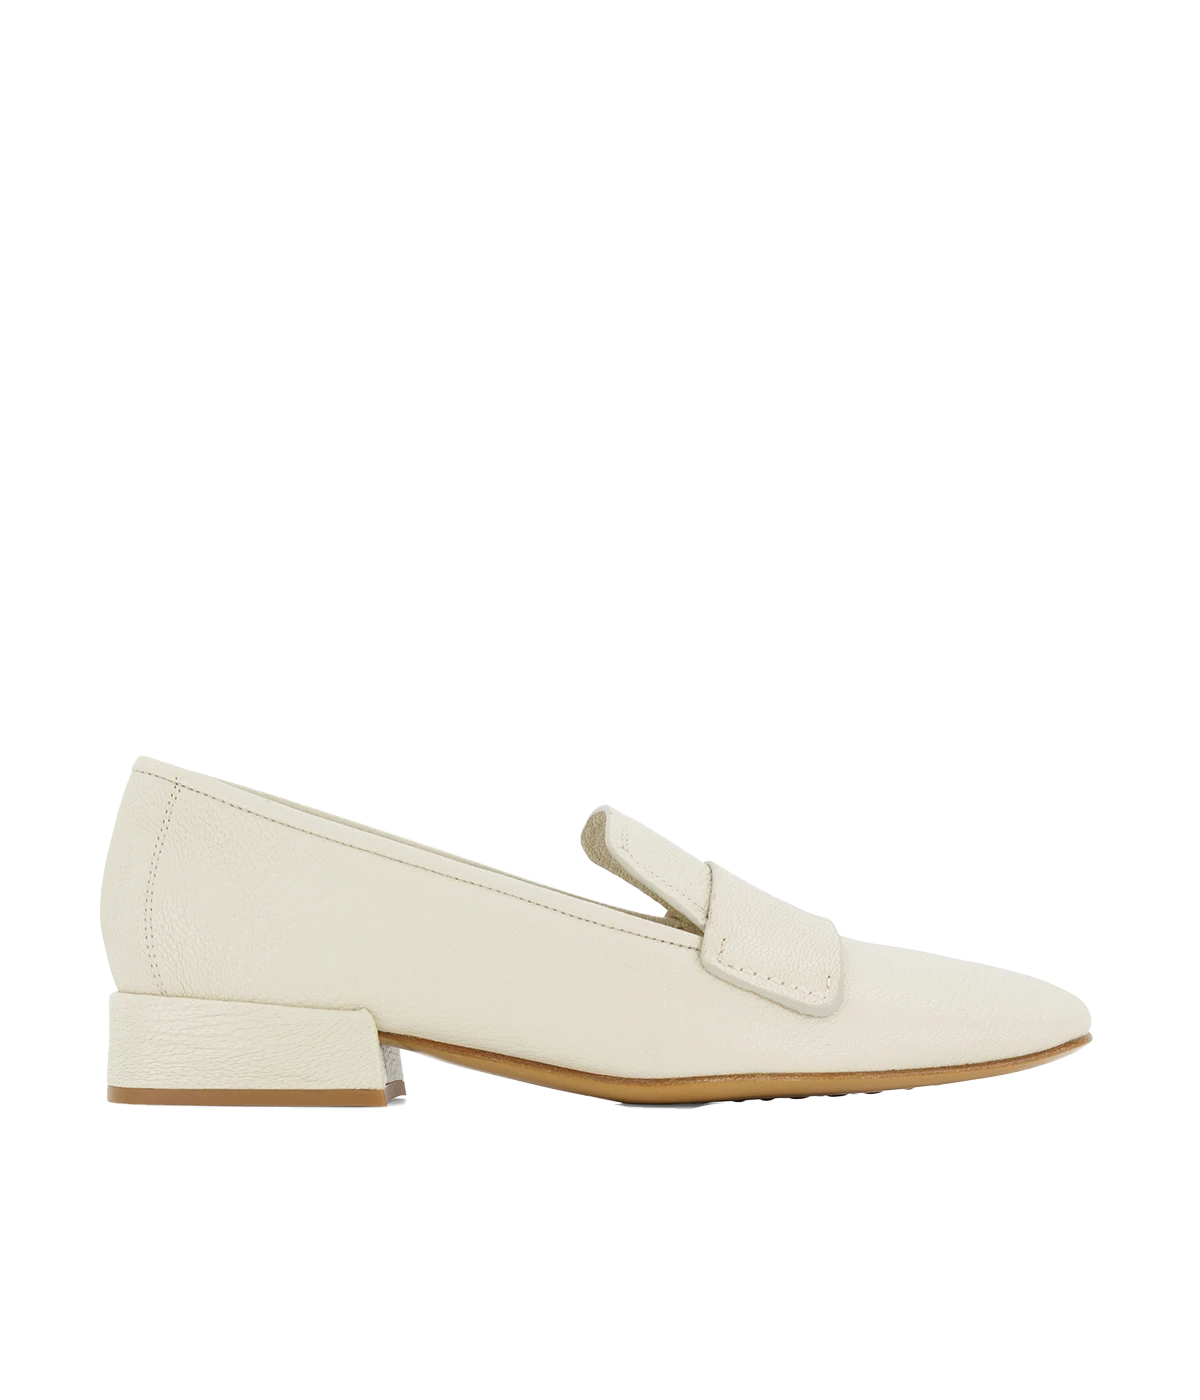 An ivory coloured loafer by Pedro Garcia from supple leather.